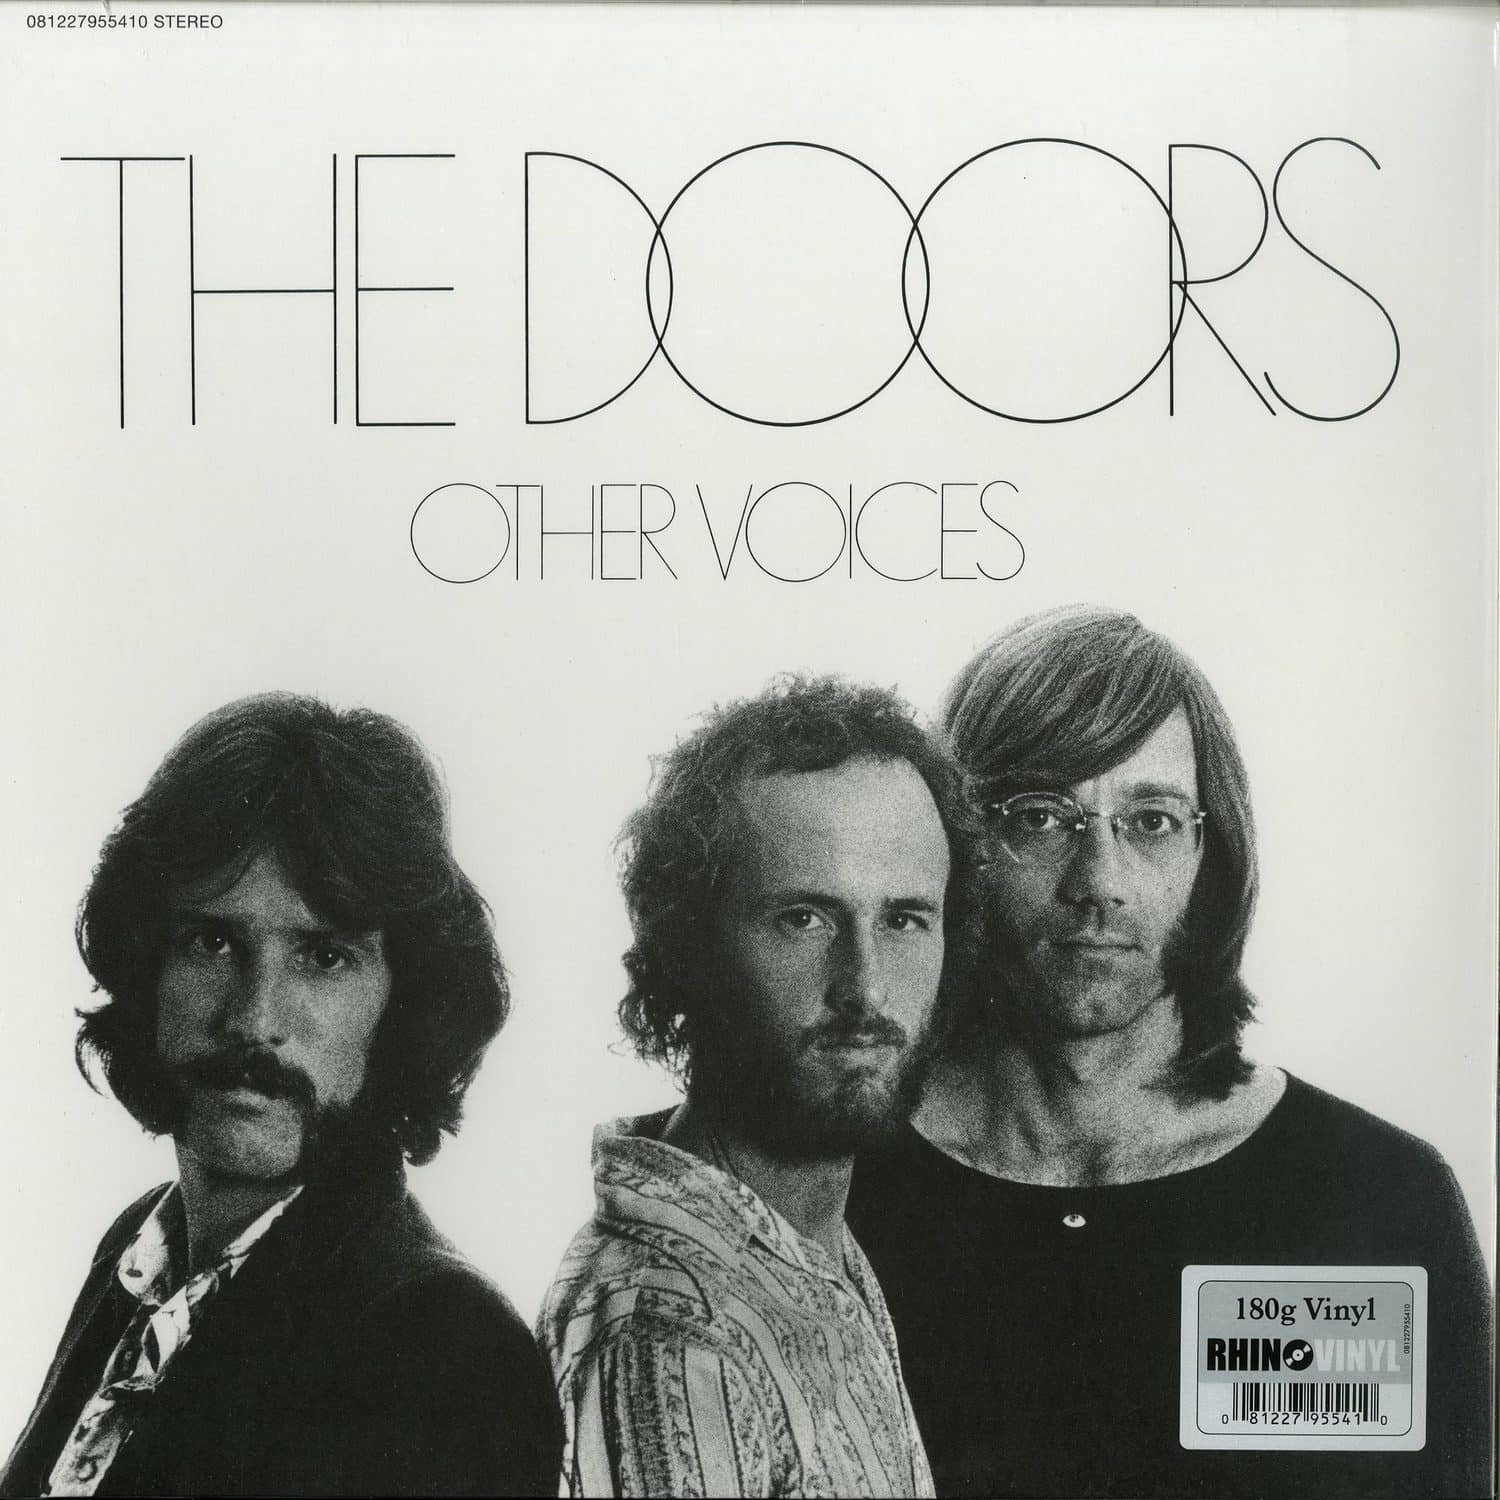 The Doors - OTHER VOICES 